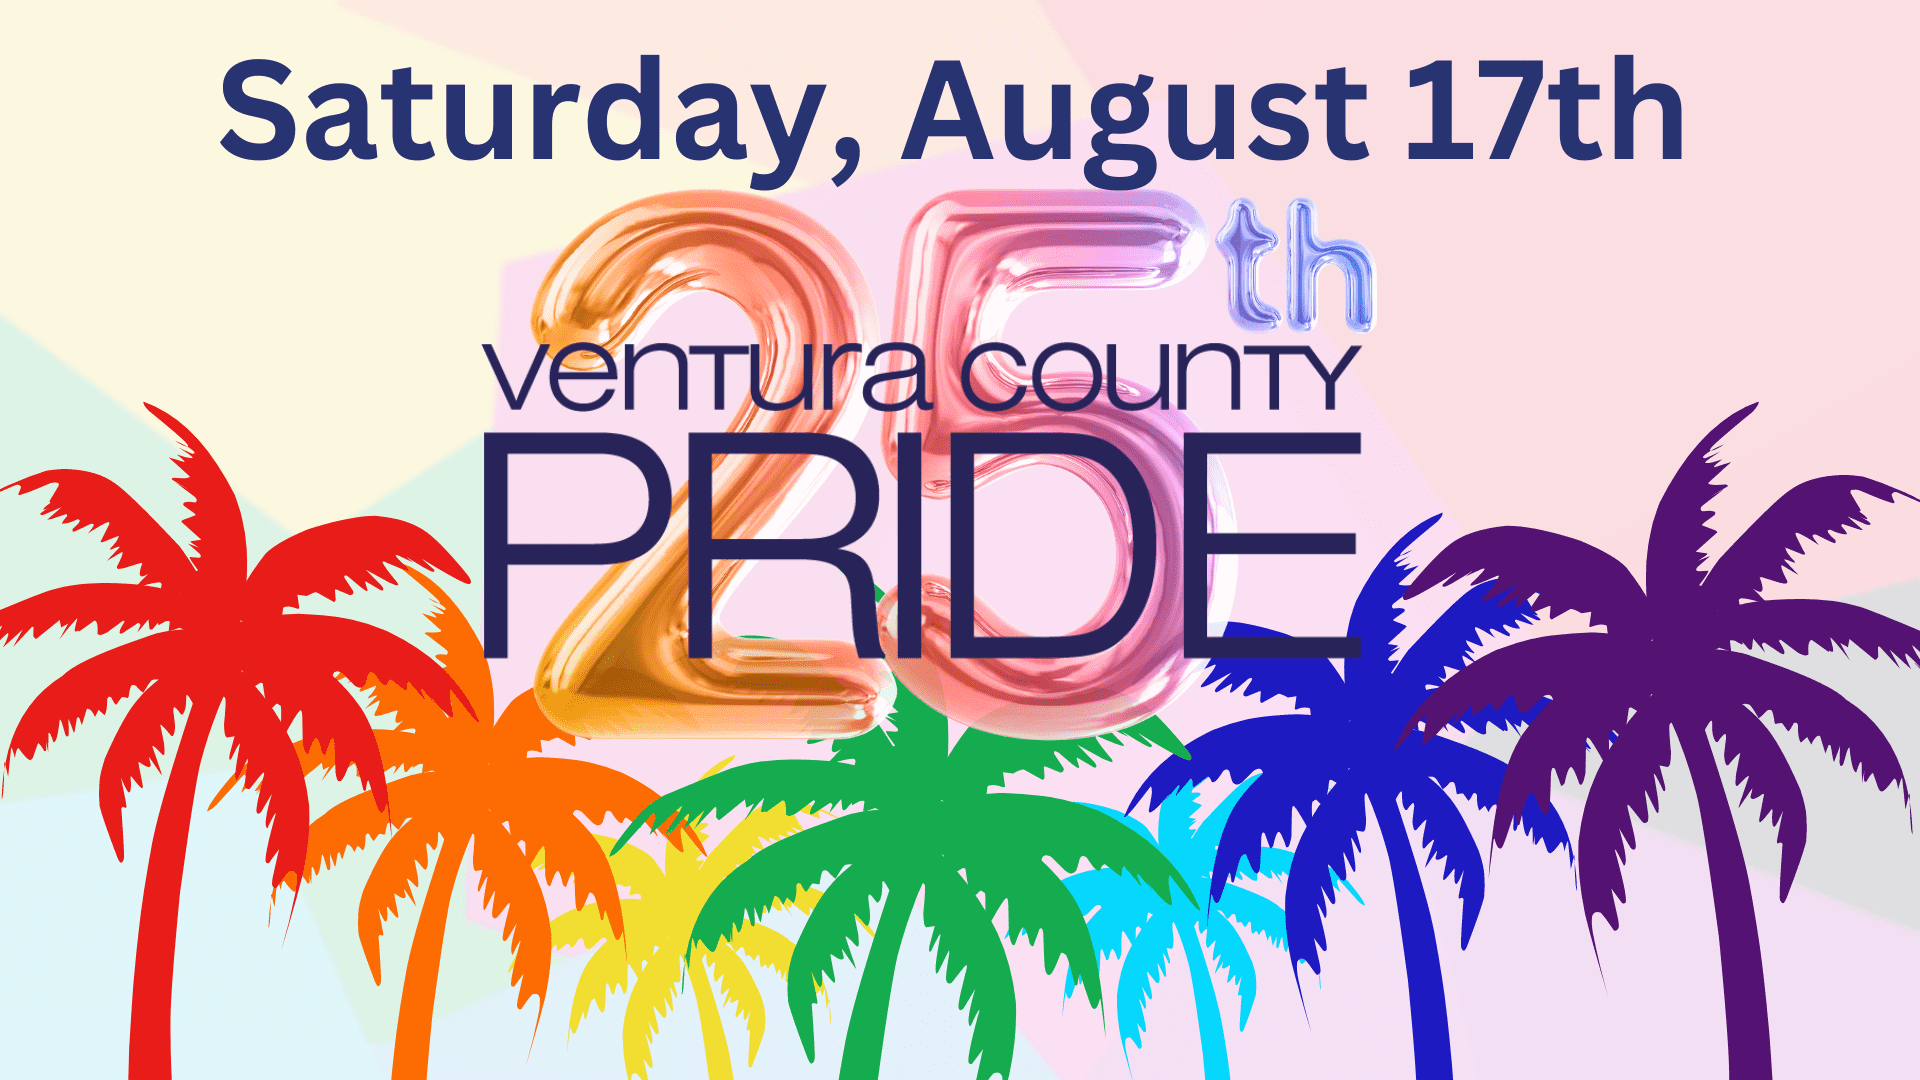 Colorful graphic promoting Ventura County Pride's 25th anniversary event on Saturday, August 17th. The background features vibrant, rainbow-colored palm trees.